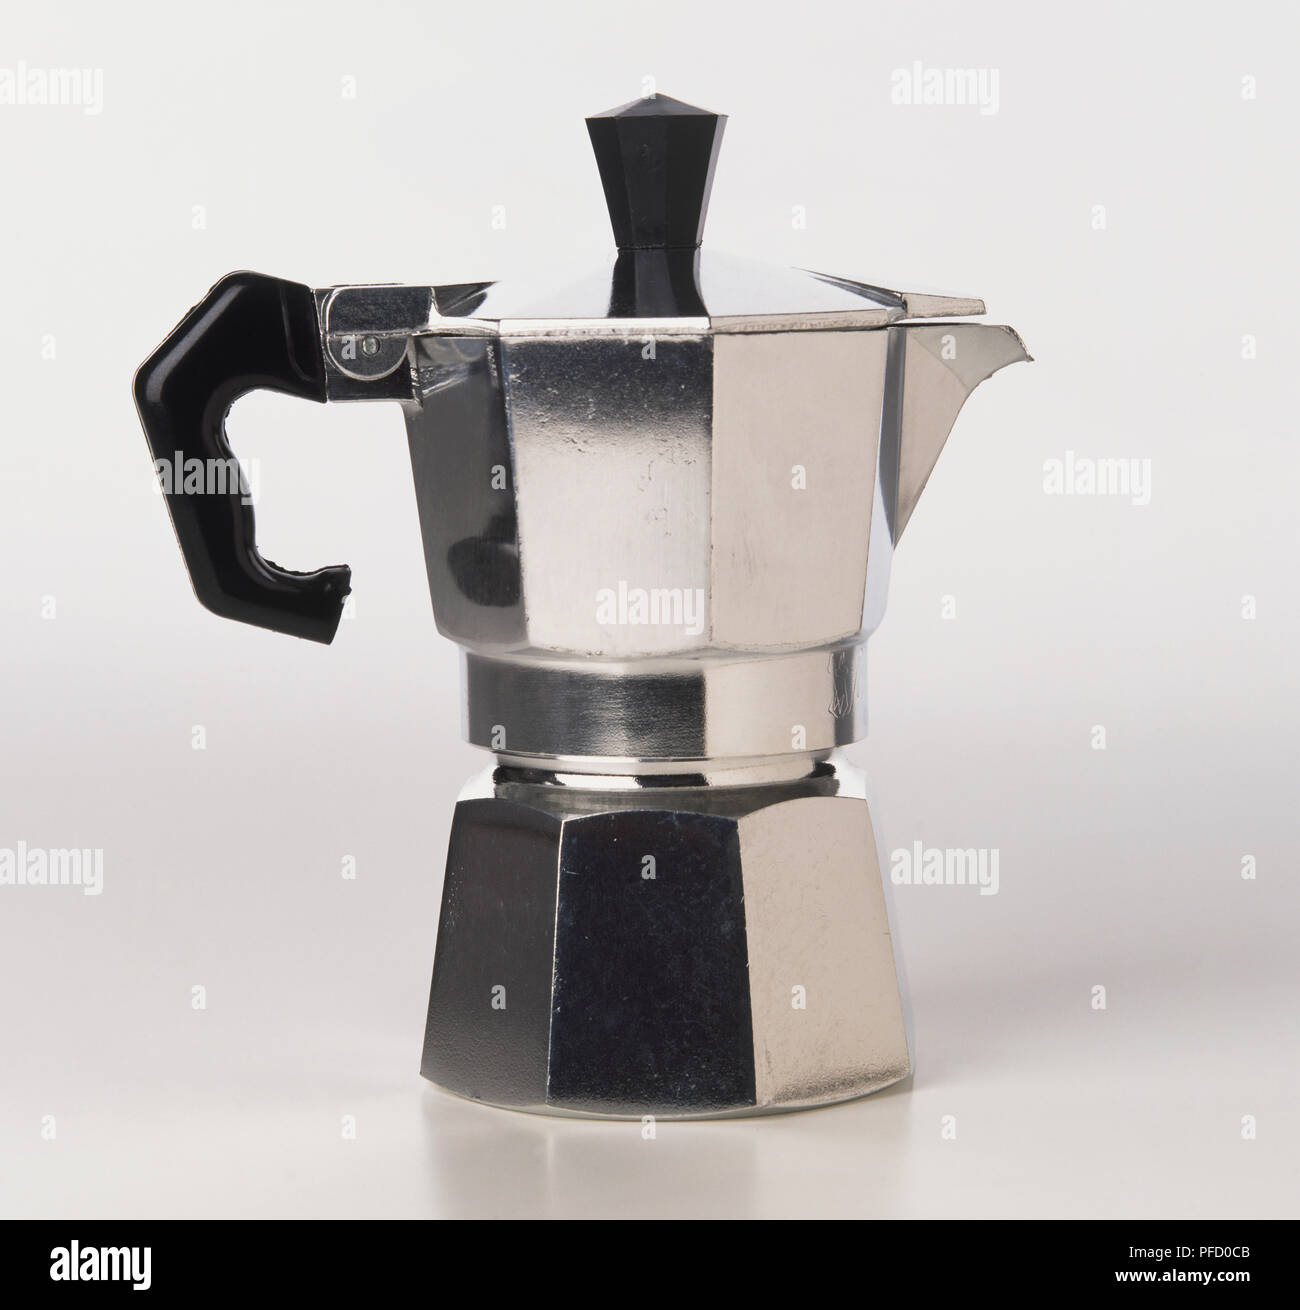 Angular metal coffee maker with a black handle, side view. Stock Photo